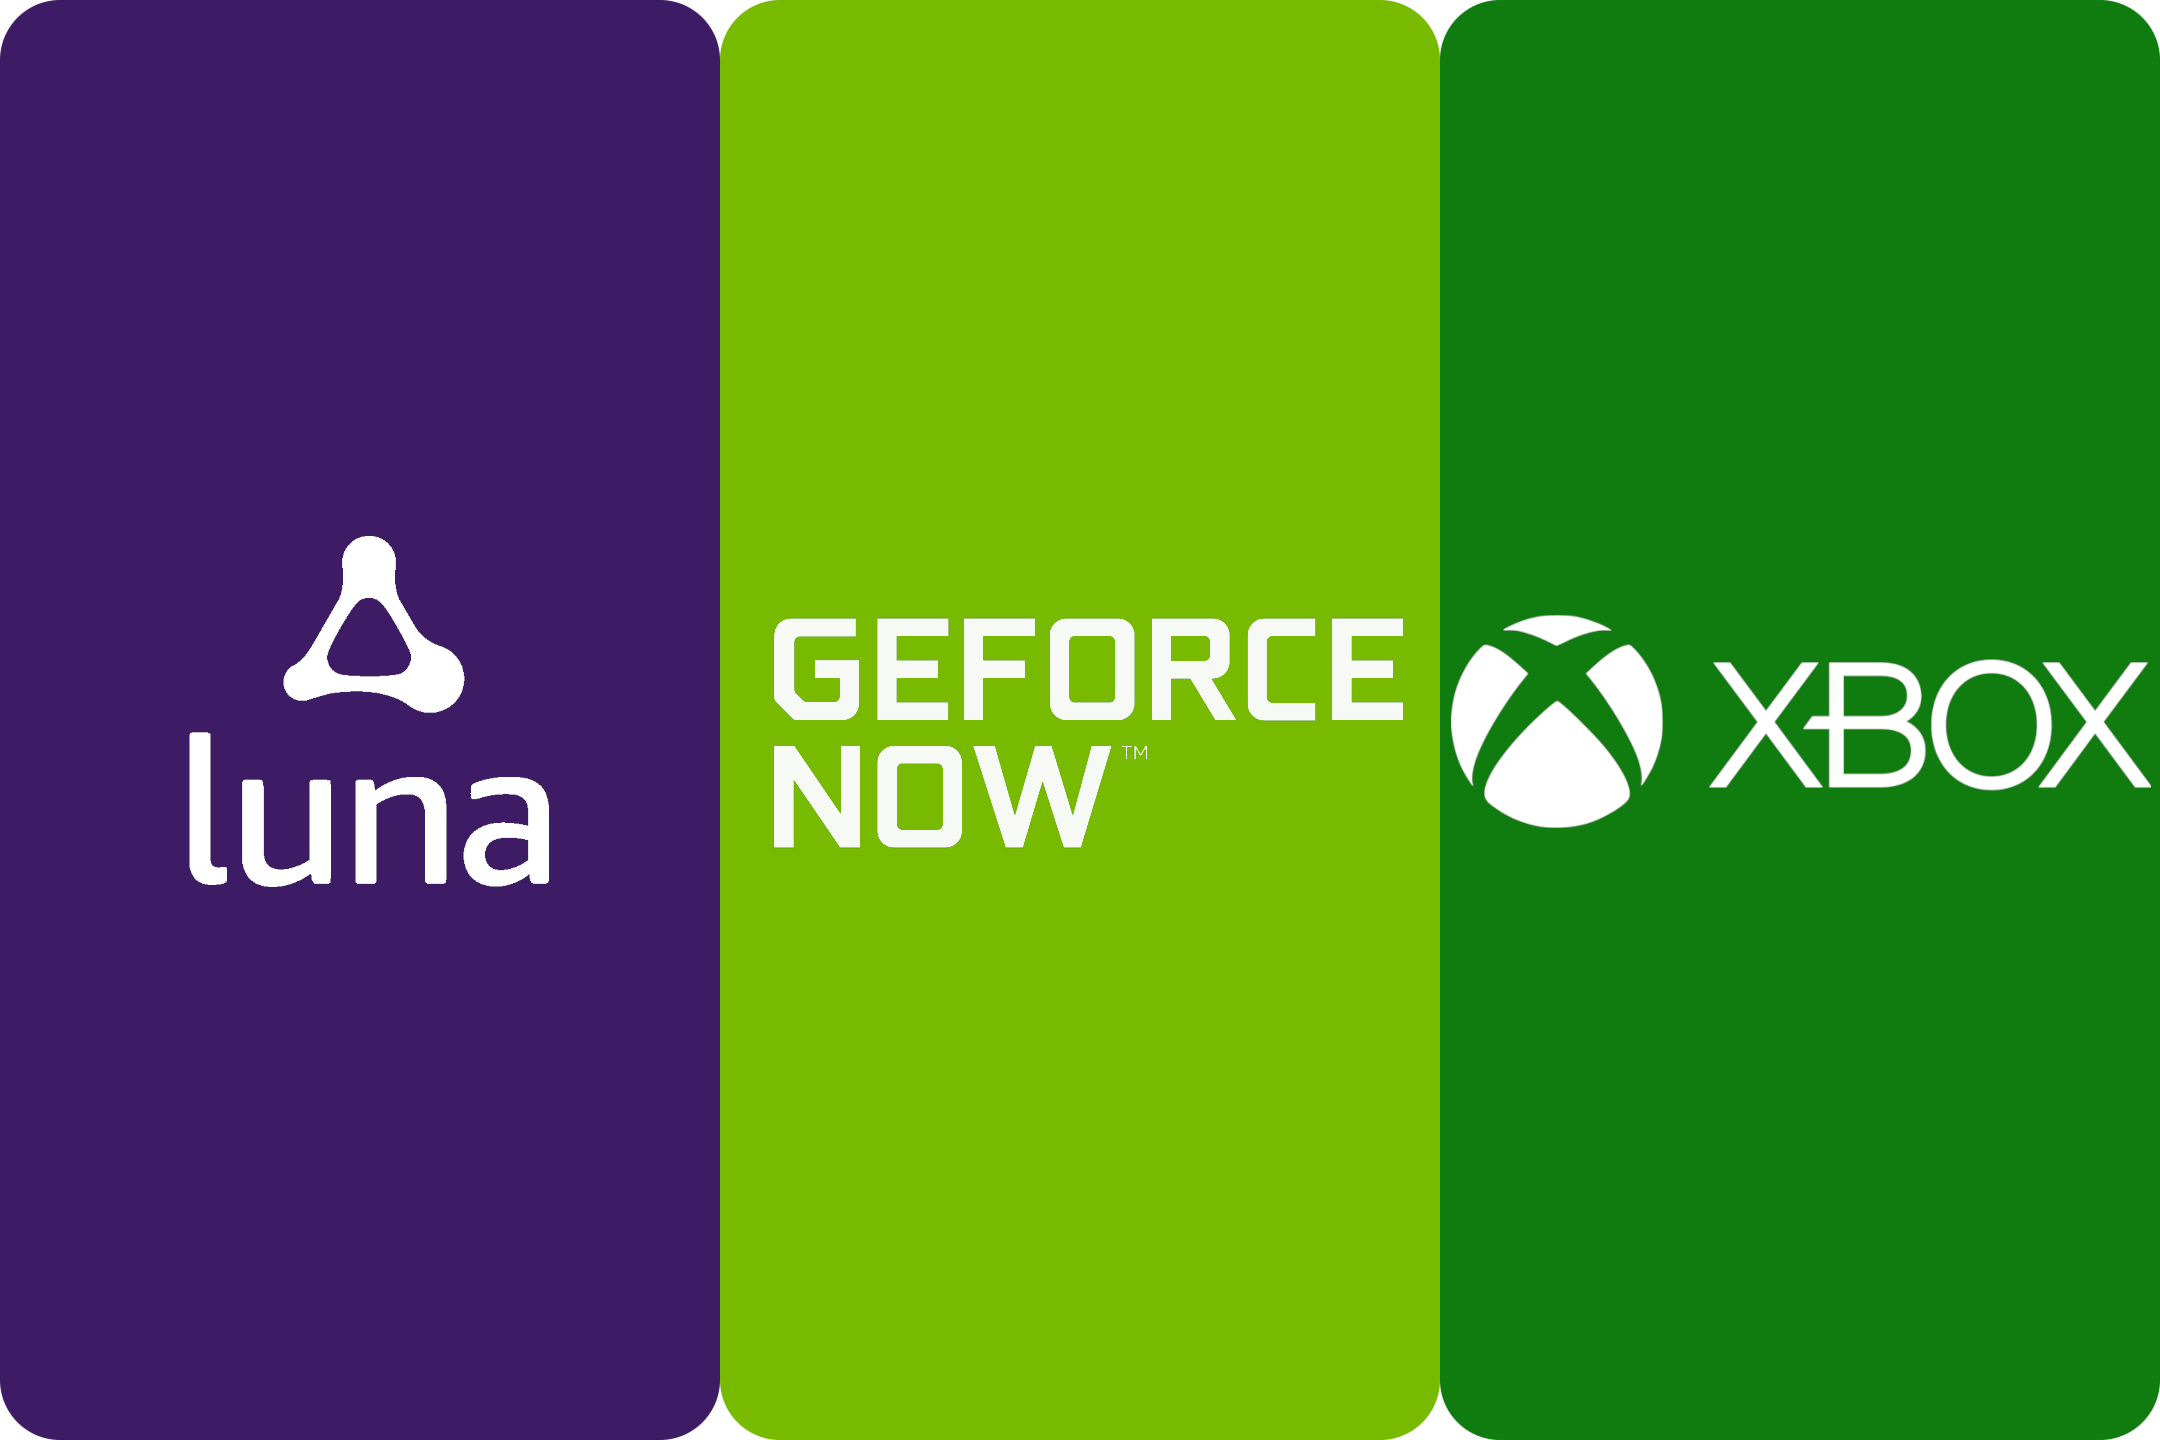 The logos for cloud gaming services Amazon Luna, Nvidia GeForce Now, and Xbox.